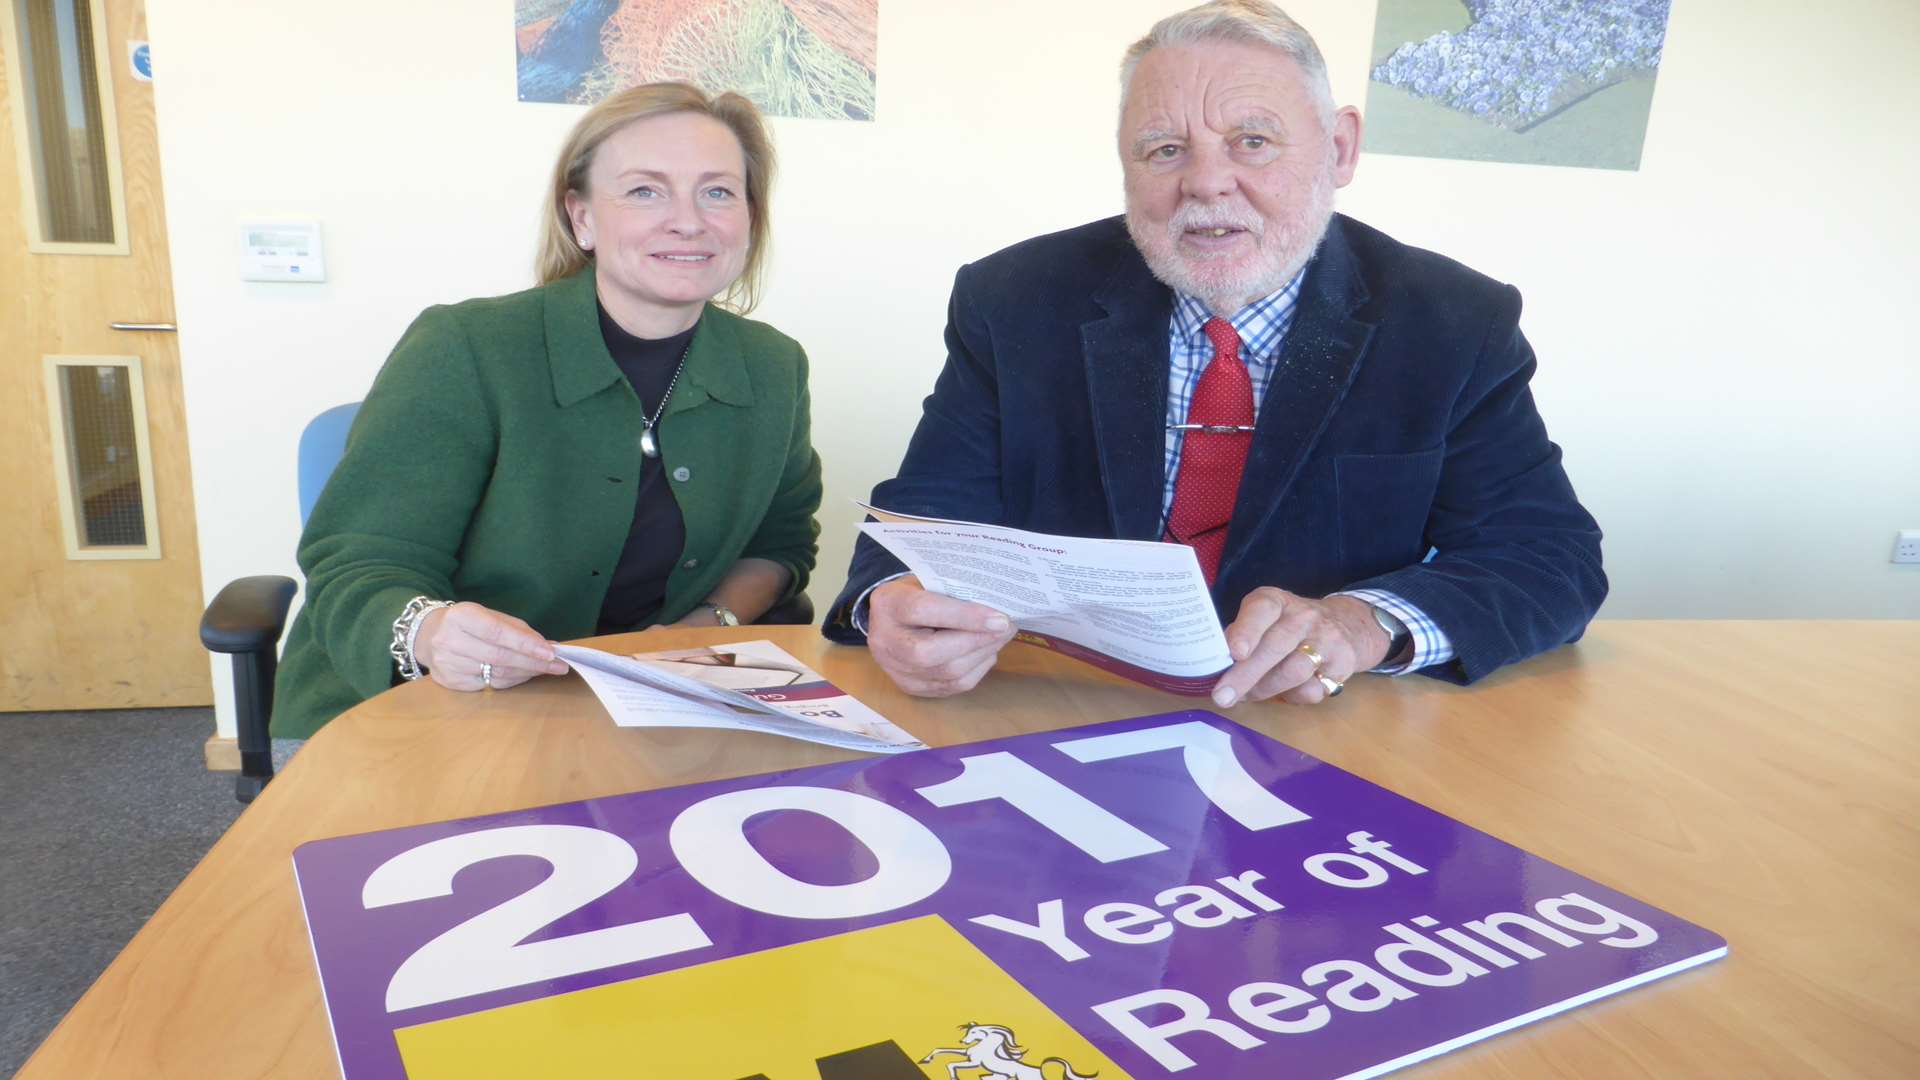 Terry Waite is briefed by KM Group chairman Geraldine Allinson on KM's Year of Reading campaign and announces his decision to become Honorary Patron of the KM Charity Team..